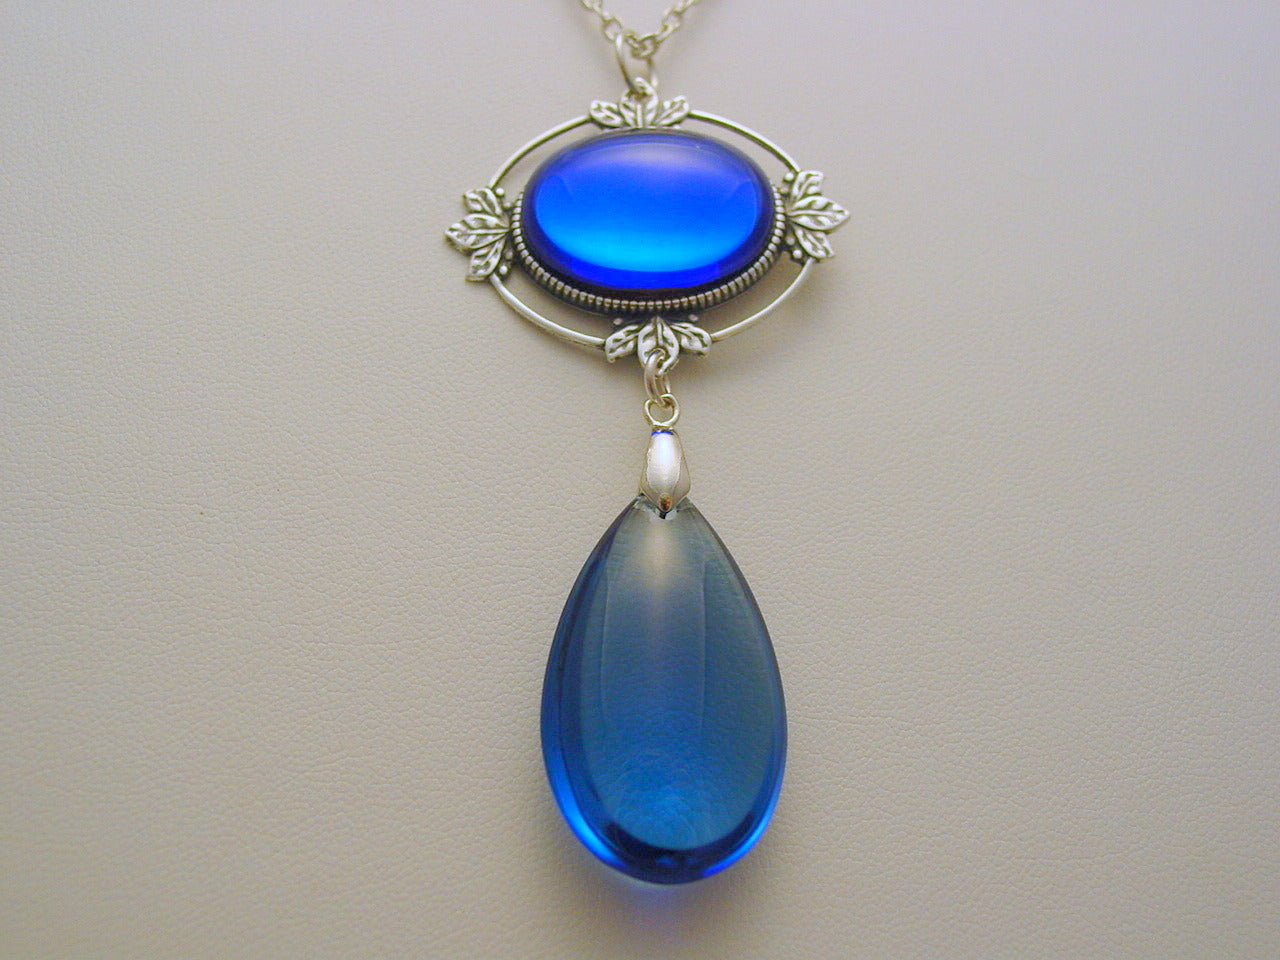 Witches Of East End Silver Oxidized Finish Wendy's Blue Pre-Cursed Necklace Witches of East End